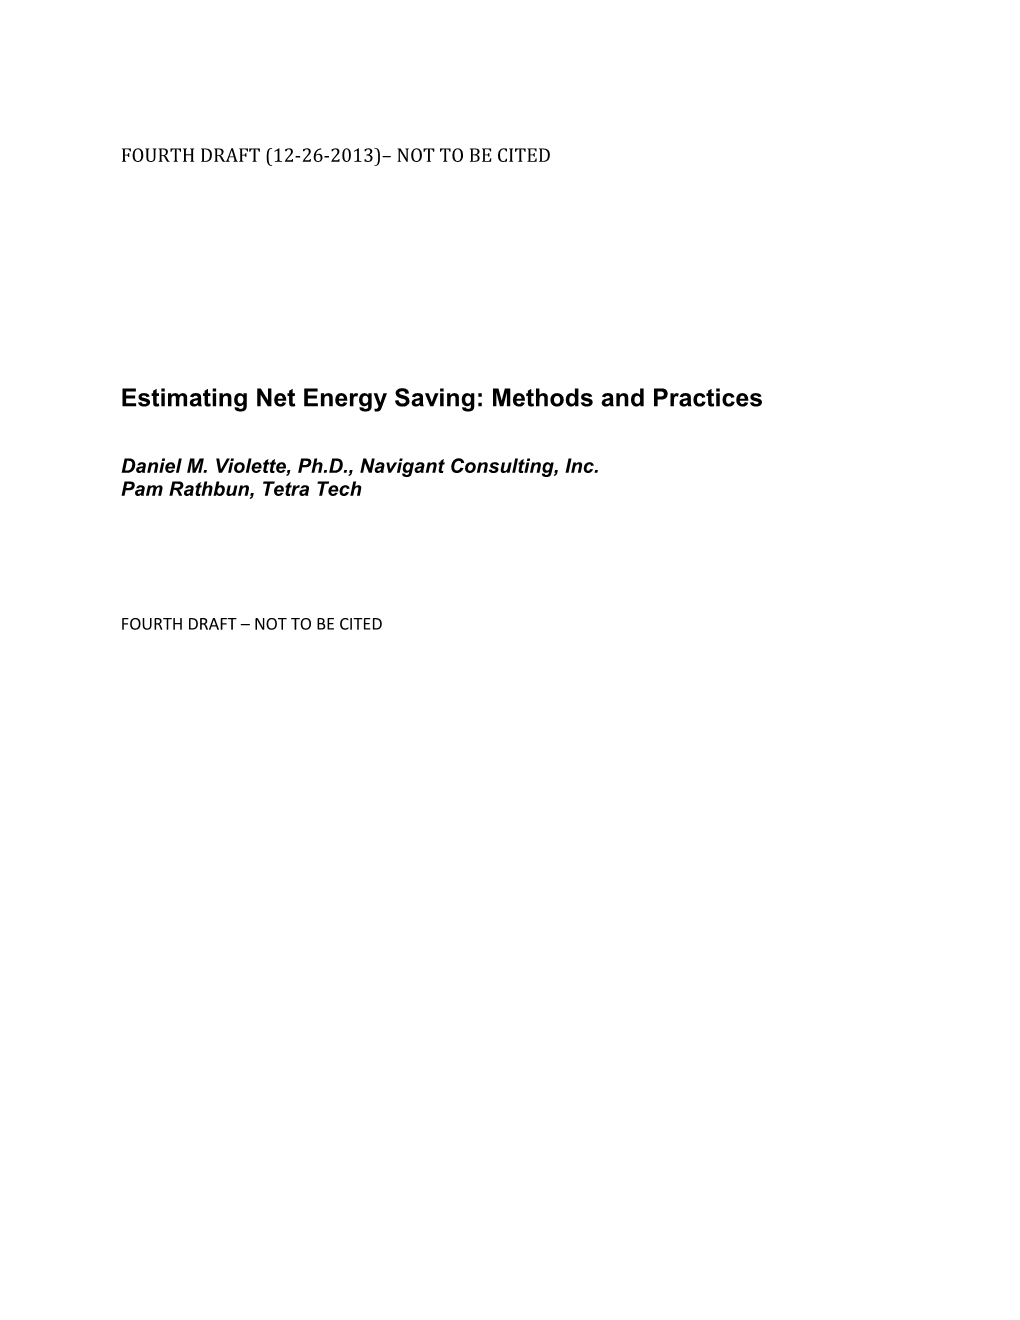 Estimating Net Energy Saving: Methods and Practices